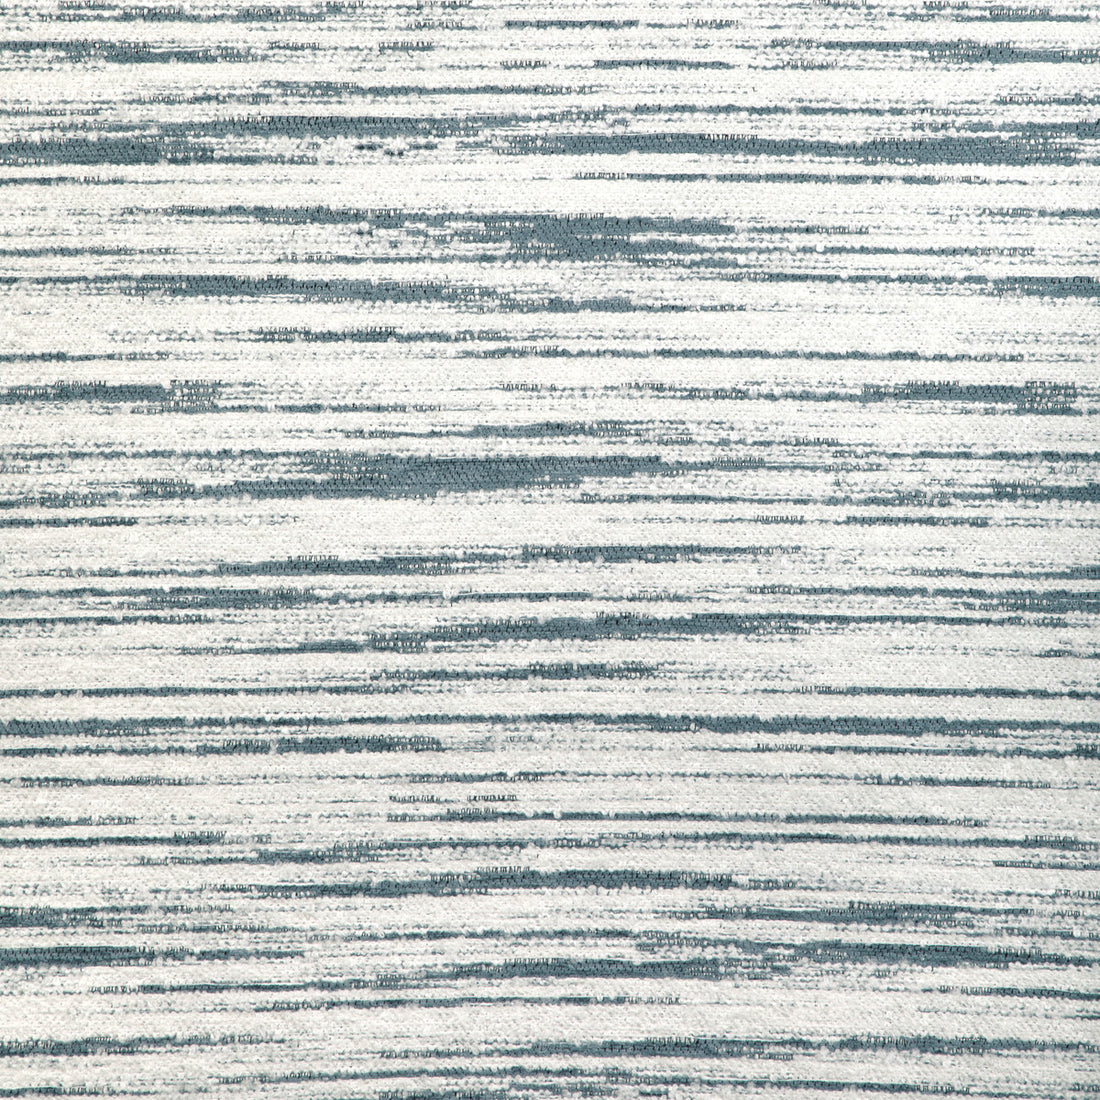 On The Horizon fabric in sky color - pattern 36831.15.0 - by Kravet Design in the Candice Olson collection